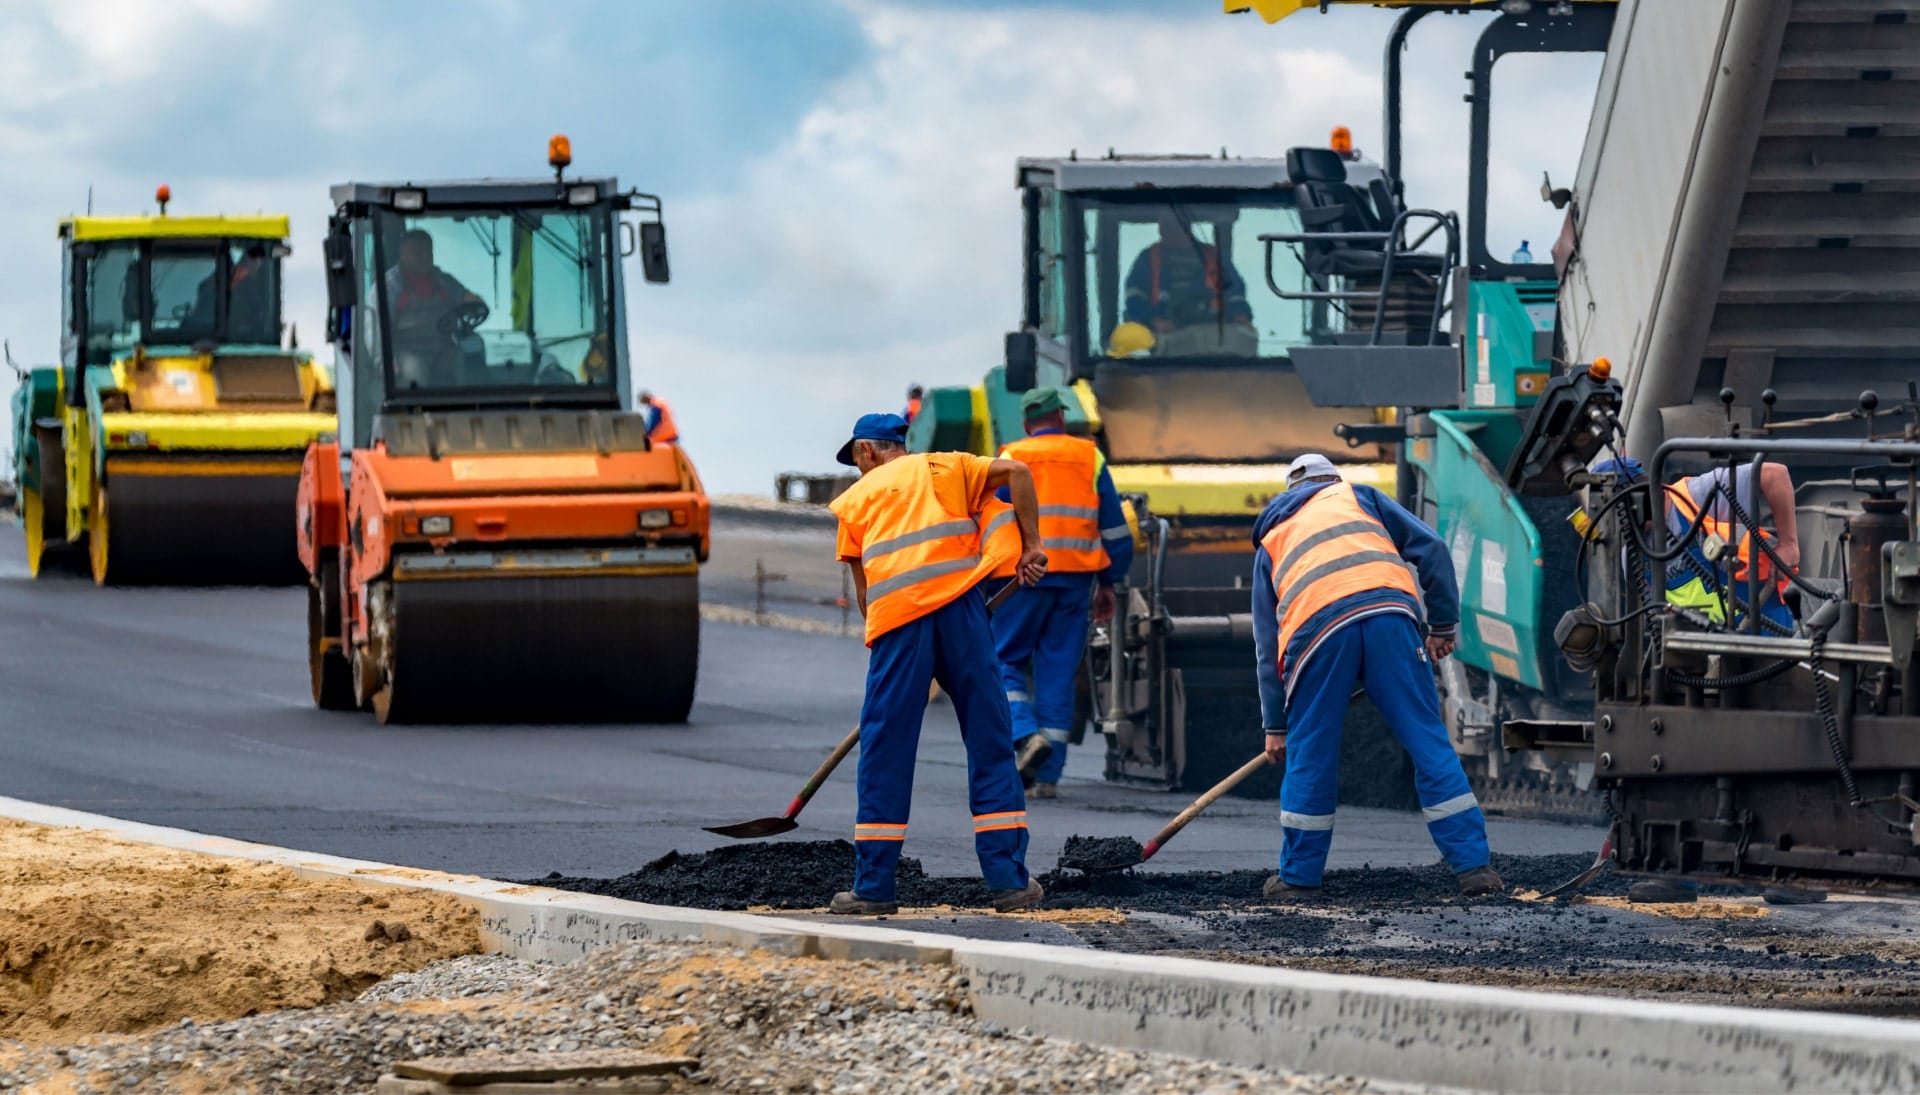 Reliable asphalt construction services in Northern, VA for various projects.